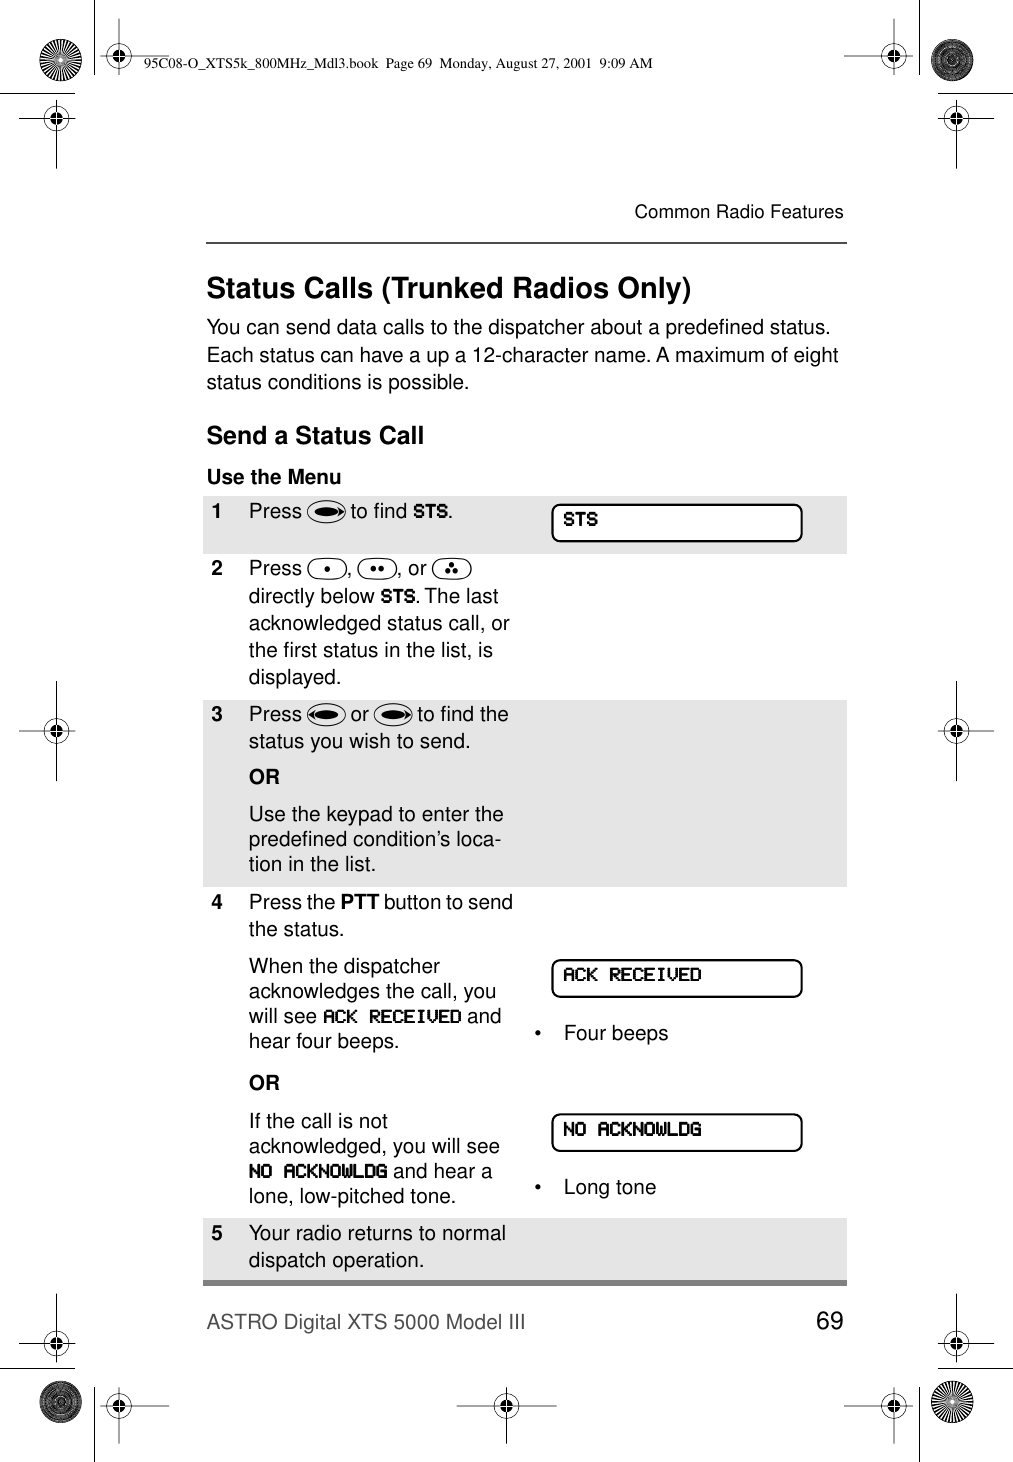 ASTRO Digital XTS 5000 Model III 69Common Radio FeaturesStatus Calls (Trunked Radios Only)You can send data calls to the dispatcher about a predeﬁned status. Each status can have a up a 12-character name. A maximum of eight status conditions is possible.Send a Status CallUse the Menu1Press U to ﬁnd SSSSTTTTSSSS.2Press D, E, or F directly below SSSSTTTTSSSS. The last acknowledged status call, or the ﬁrst status in the list, is displayed.3Press V or U to ﬁnd the status you wish to send.ORUse the keypad to enter the predeﬁned condition’s loca-tion in the list. 4Press the PTT button to send the status.When the dispatcher acknowledges the call, you will see AAAACCCCKKKK    RRRREEEECCCCEEEEIIIIVVVVEEEEDDDD and hear four beeps.OR• Four beepsIf the call is not acknowledged, you will see NNNNOOOO    AAAACCCCKKKKNNNNOOOOWWWWLLLLDDDDGGGG and hear a lone, low-pitched tone. • Long tone5Your radio returns to normal dispatch operation.SSSSTTTTSSSSAAAACCCCKKKK    RRRREEEECCCCEEEEIIIIVVVVEEEEDDDDNNNNOOOO    AAAACCCCKKKKNNNNOOOOWWWWLLLLDDDDGGGG95C08-O_XTS5k_800MHz_Mdl3.book  Page 69  Monday, August 27, 2001  9:09 AM